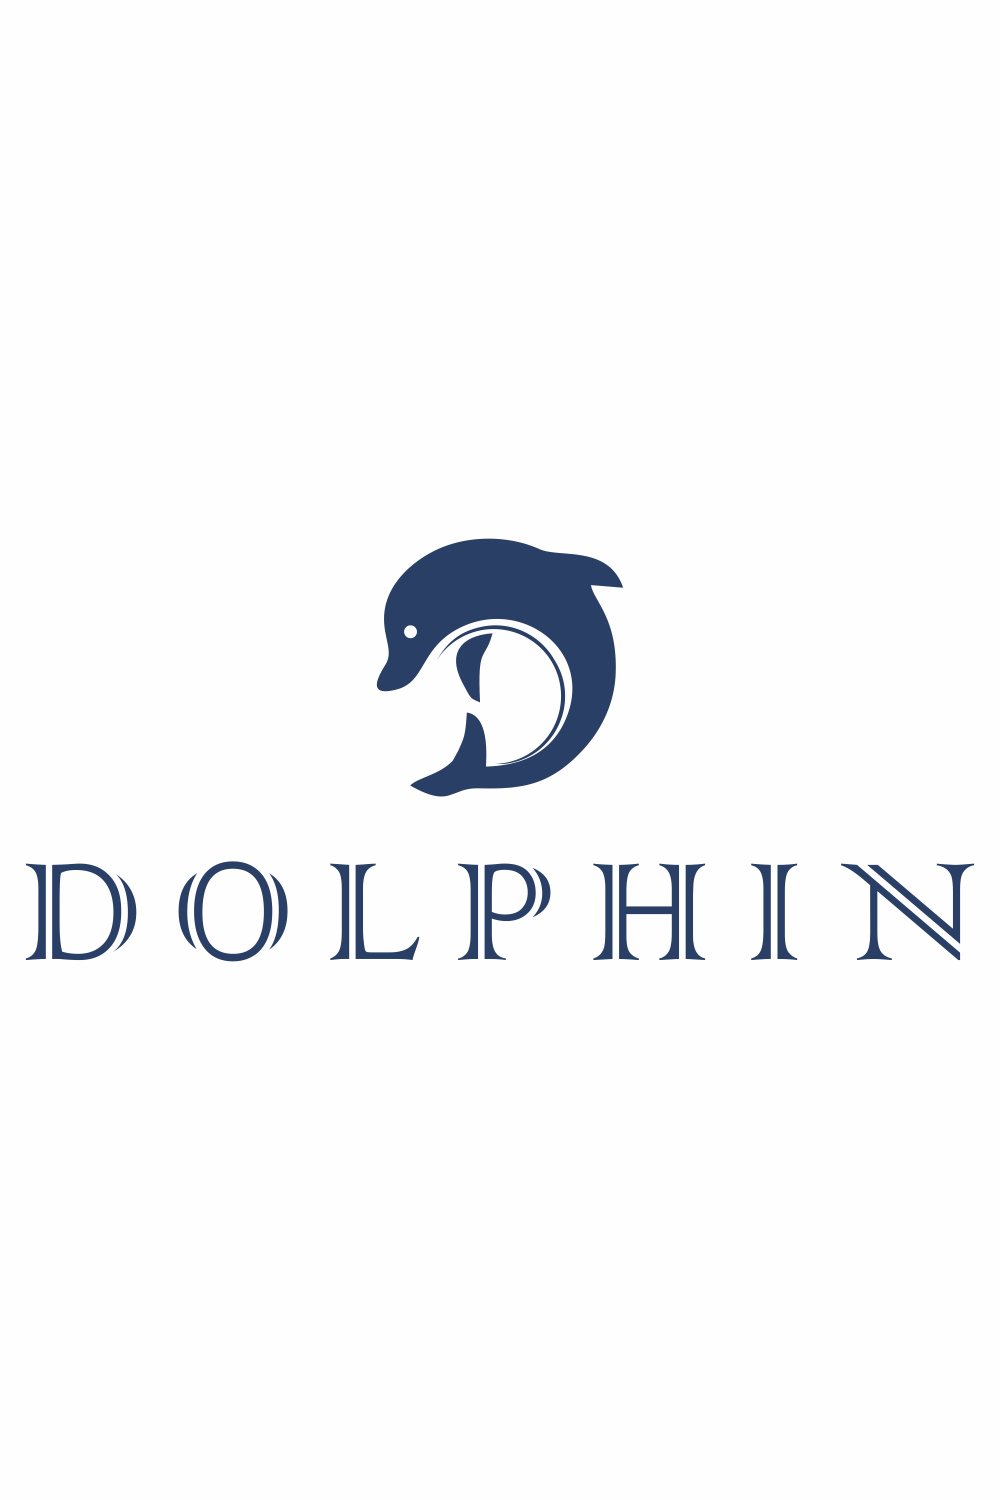 Dolphin logo with a combination of the letter D in dark blue pinterest preview image.